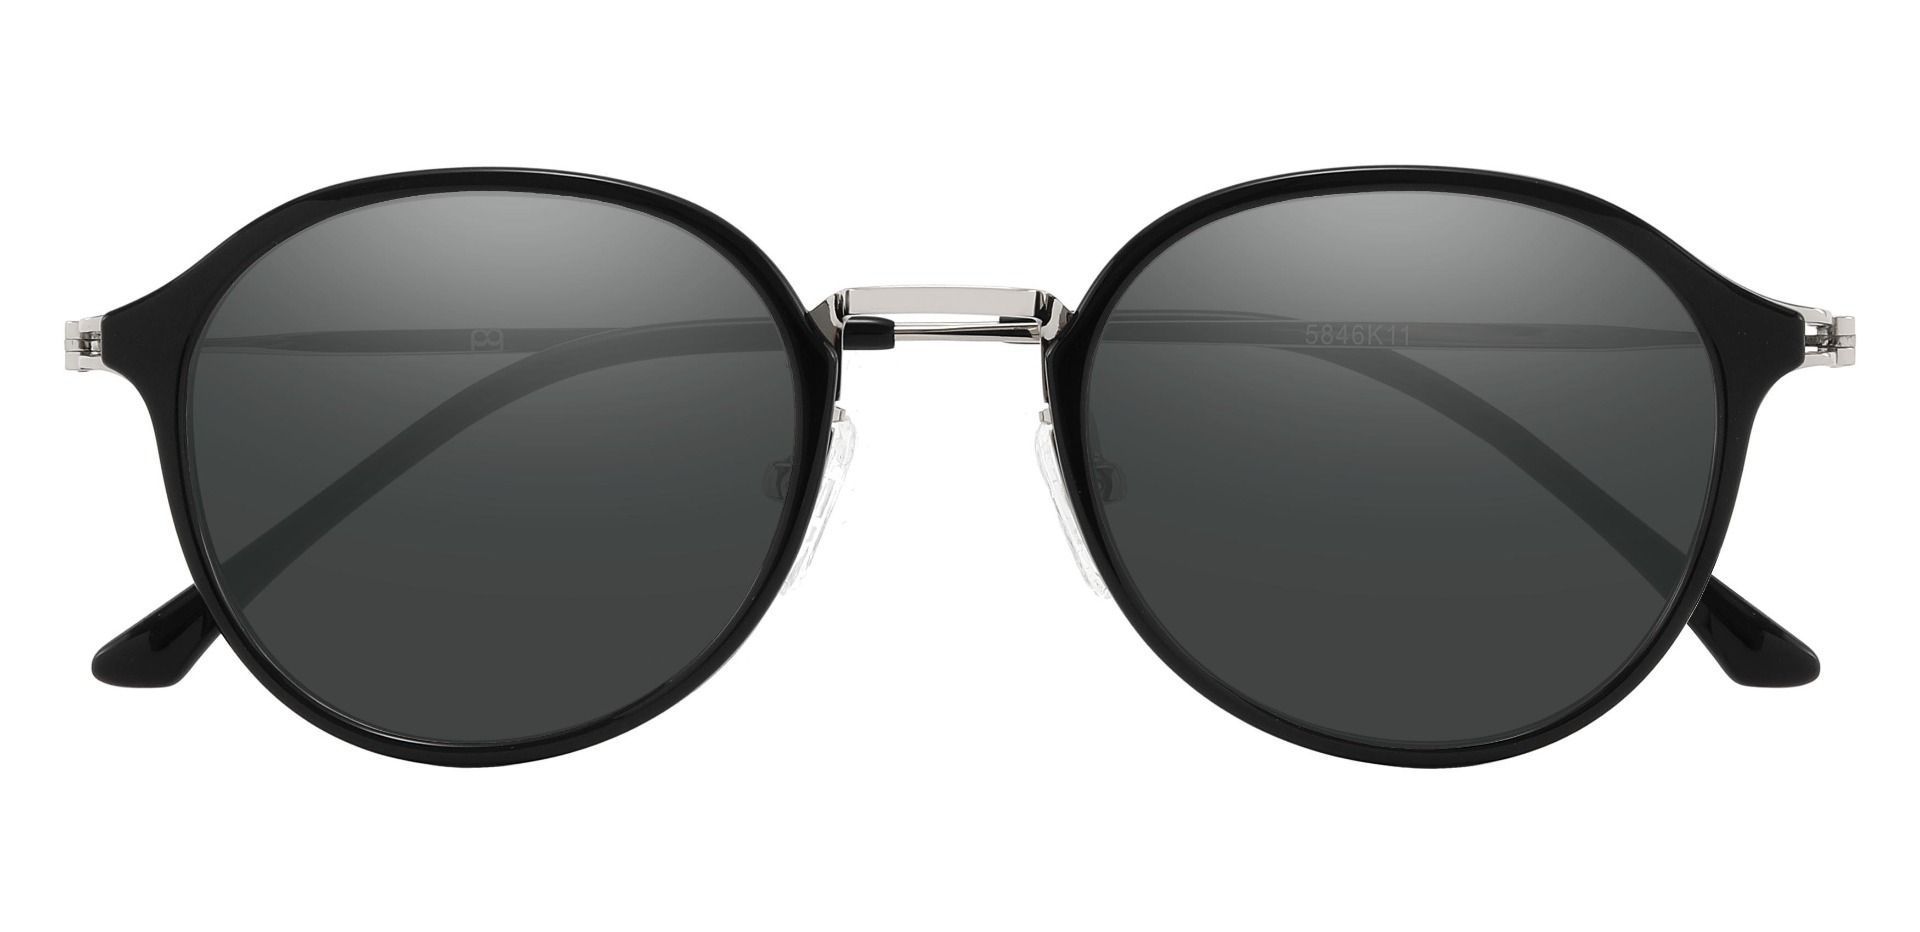 Billings Round Non-Rx Sunglasses - Black Frame With Gray Lenses